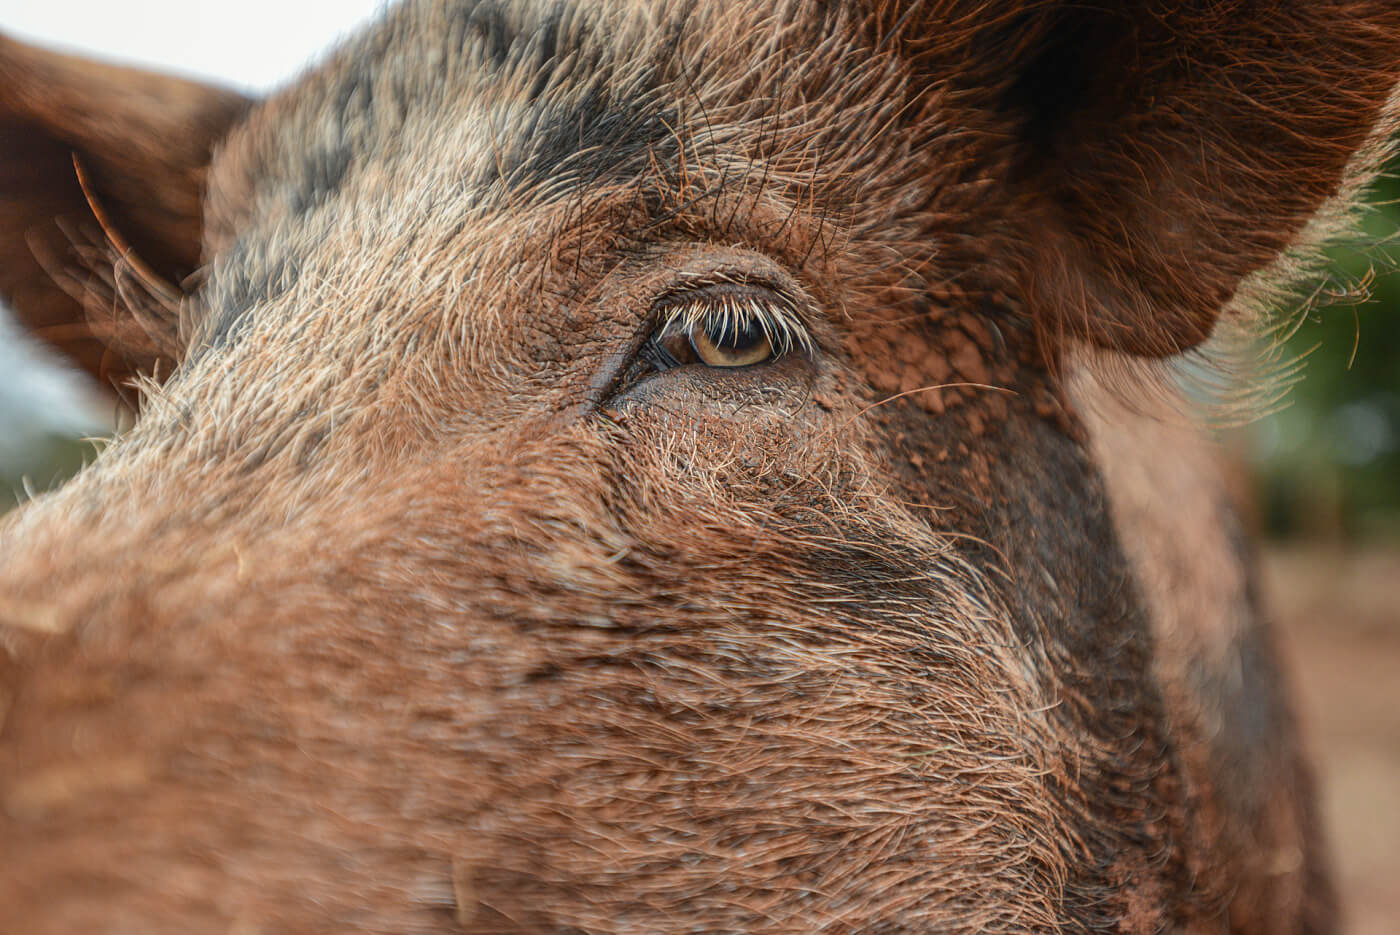 They Deserve Better: Speak Up for Pigs in Victoria